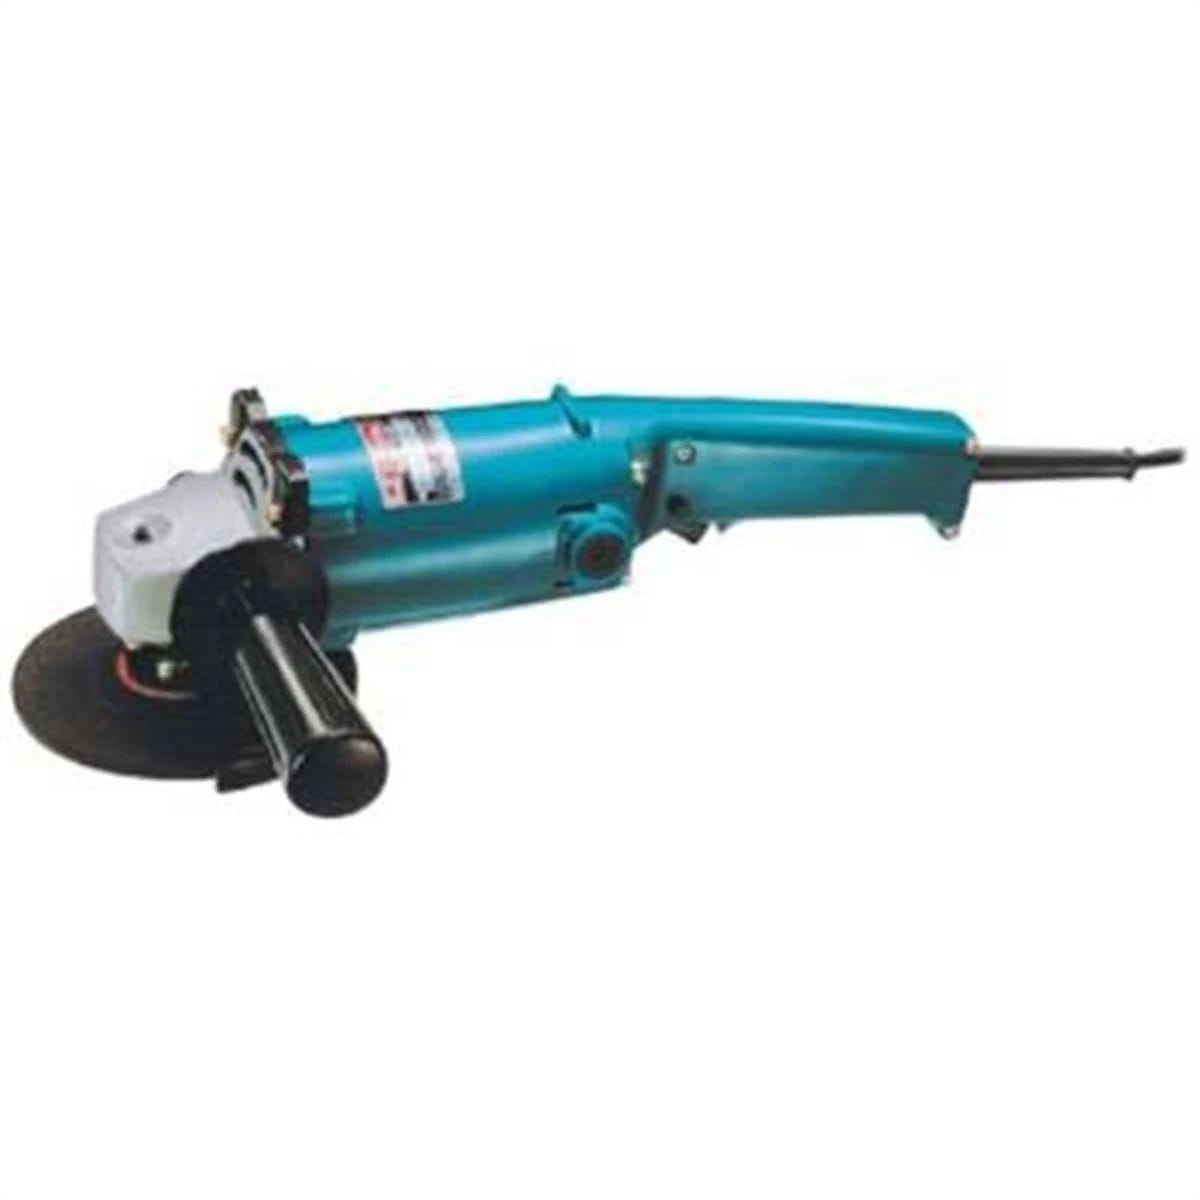 Makita 9005B 5 In. Angle Grinder with Removable Side Handle and Spindle Lock | Image